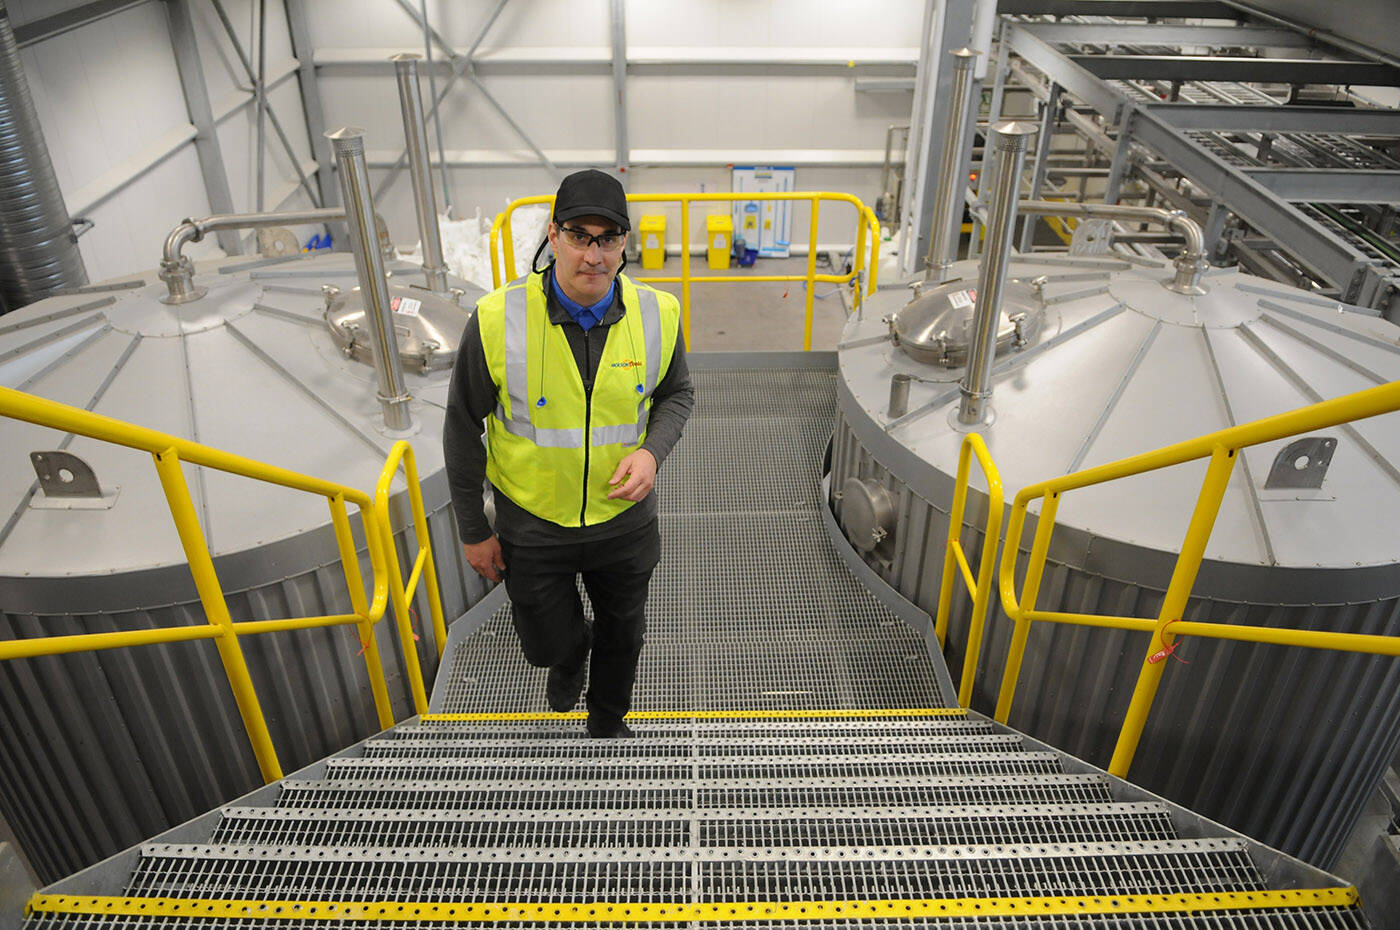 David Hamel, Molson Coors general manager of operations for Western Canada, is seen on March 17, 2022 by the tanks that were converted to produce malt and spirit-based beverages at the Chilliwack brewery. (Jenna Hauck/ Chilliwack Progress)